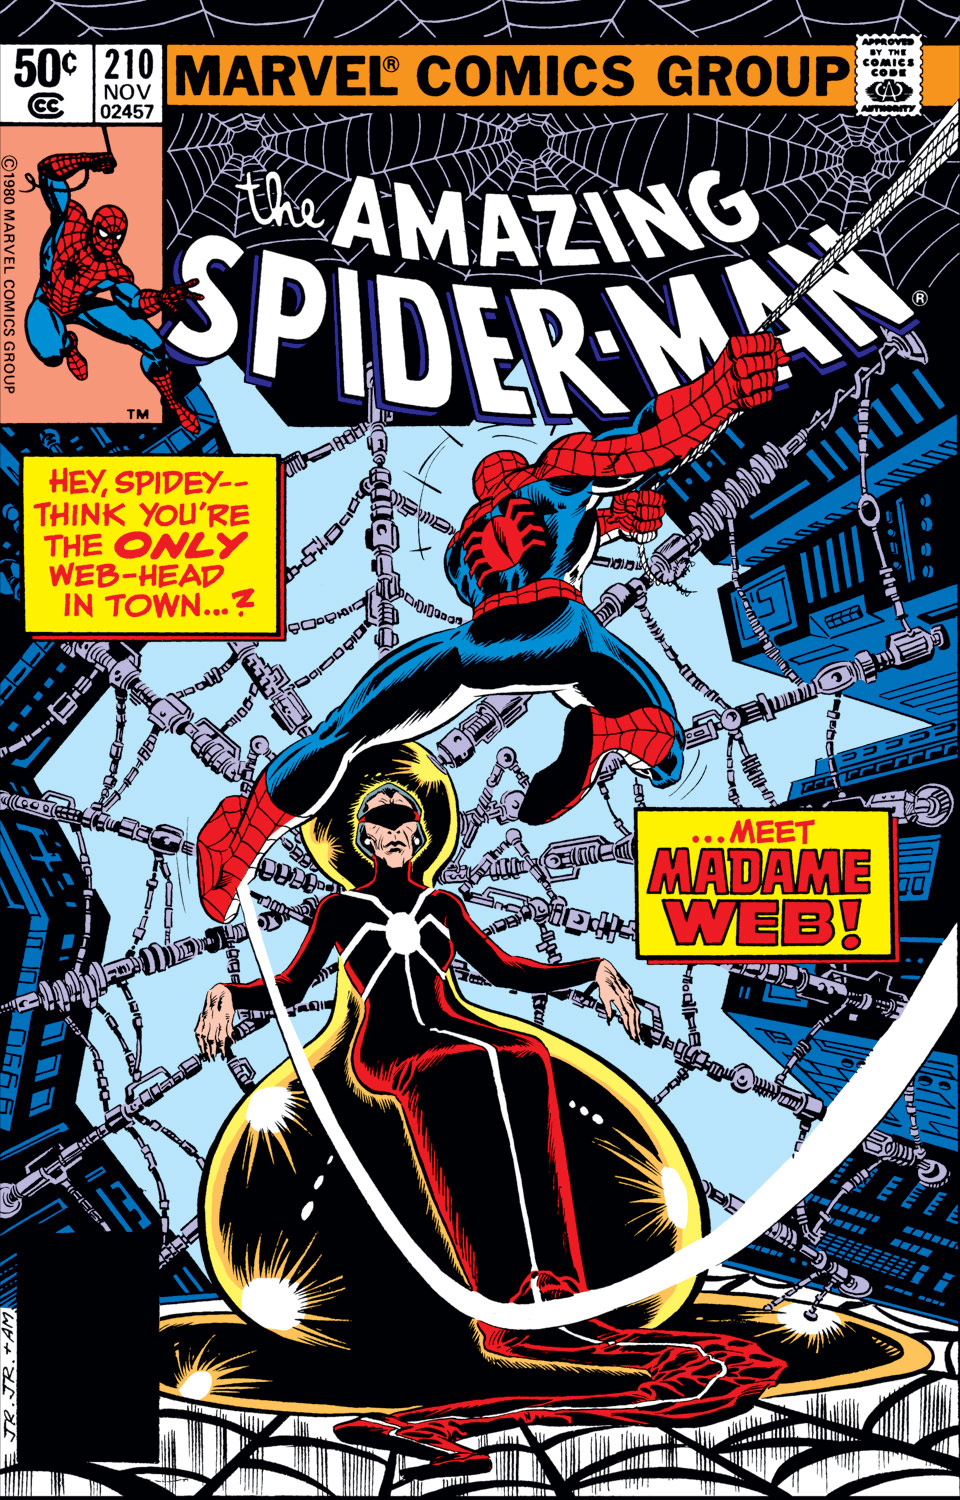 The cover of Amazing Spider-Man #210, the first appearance of Madame Web.